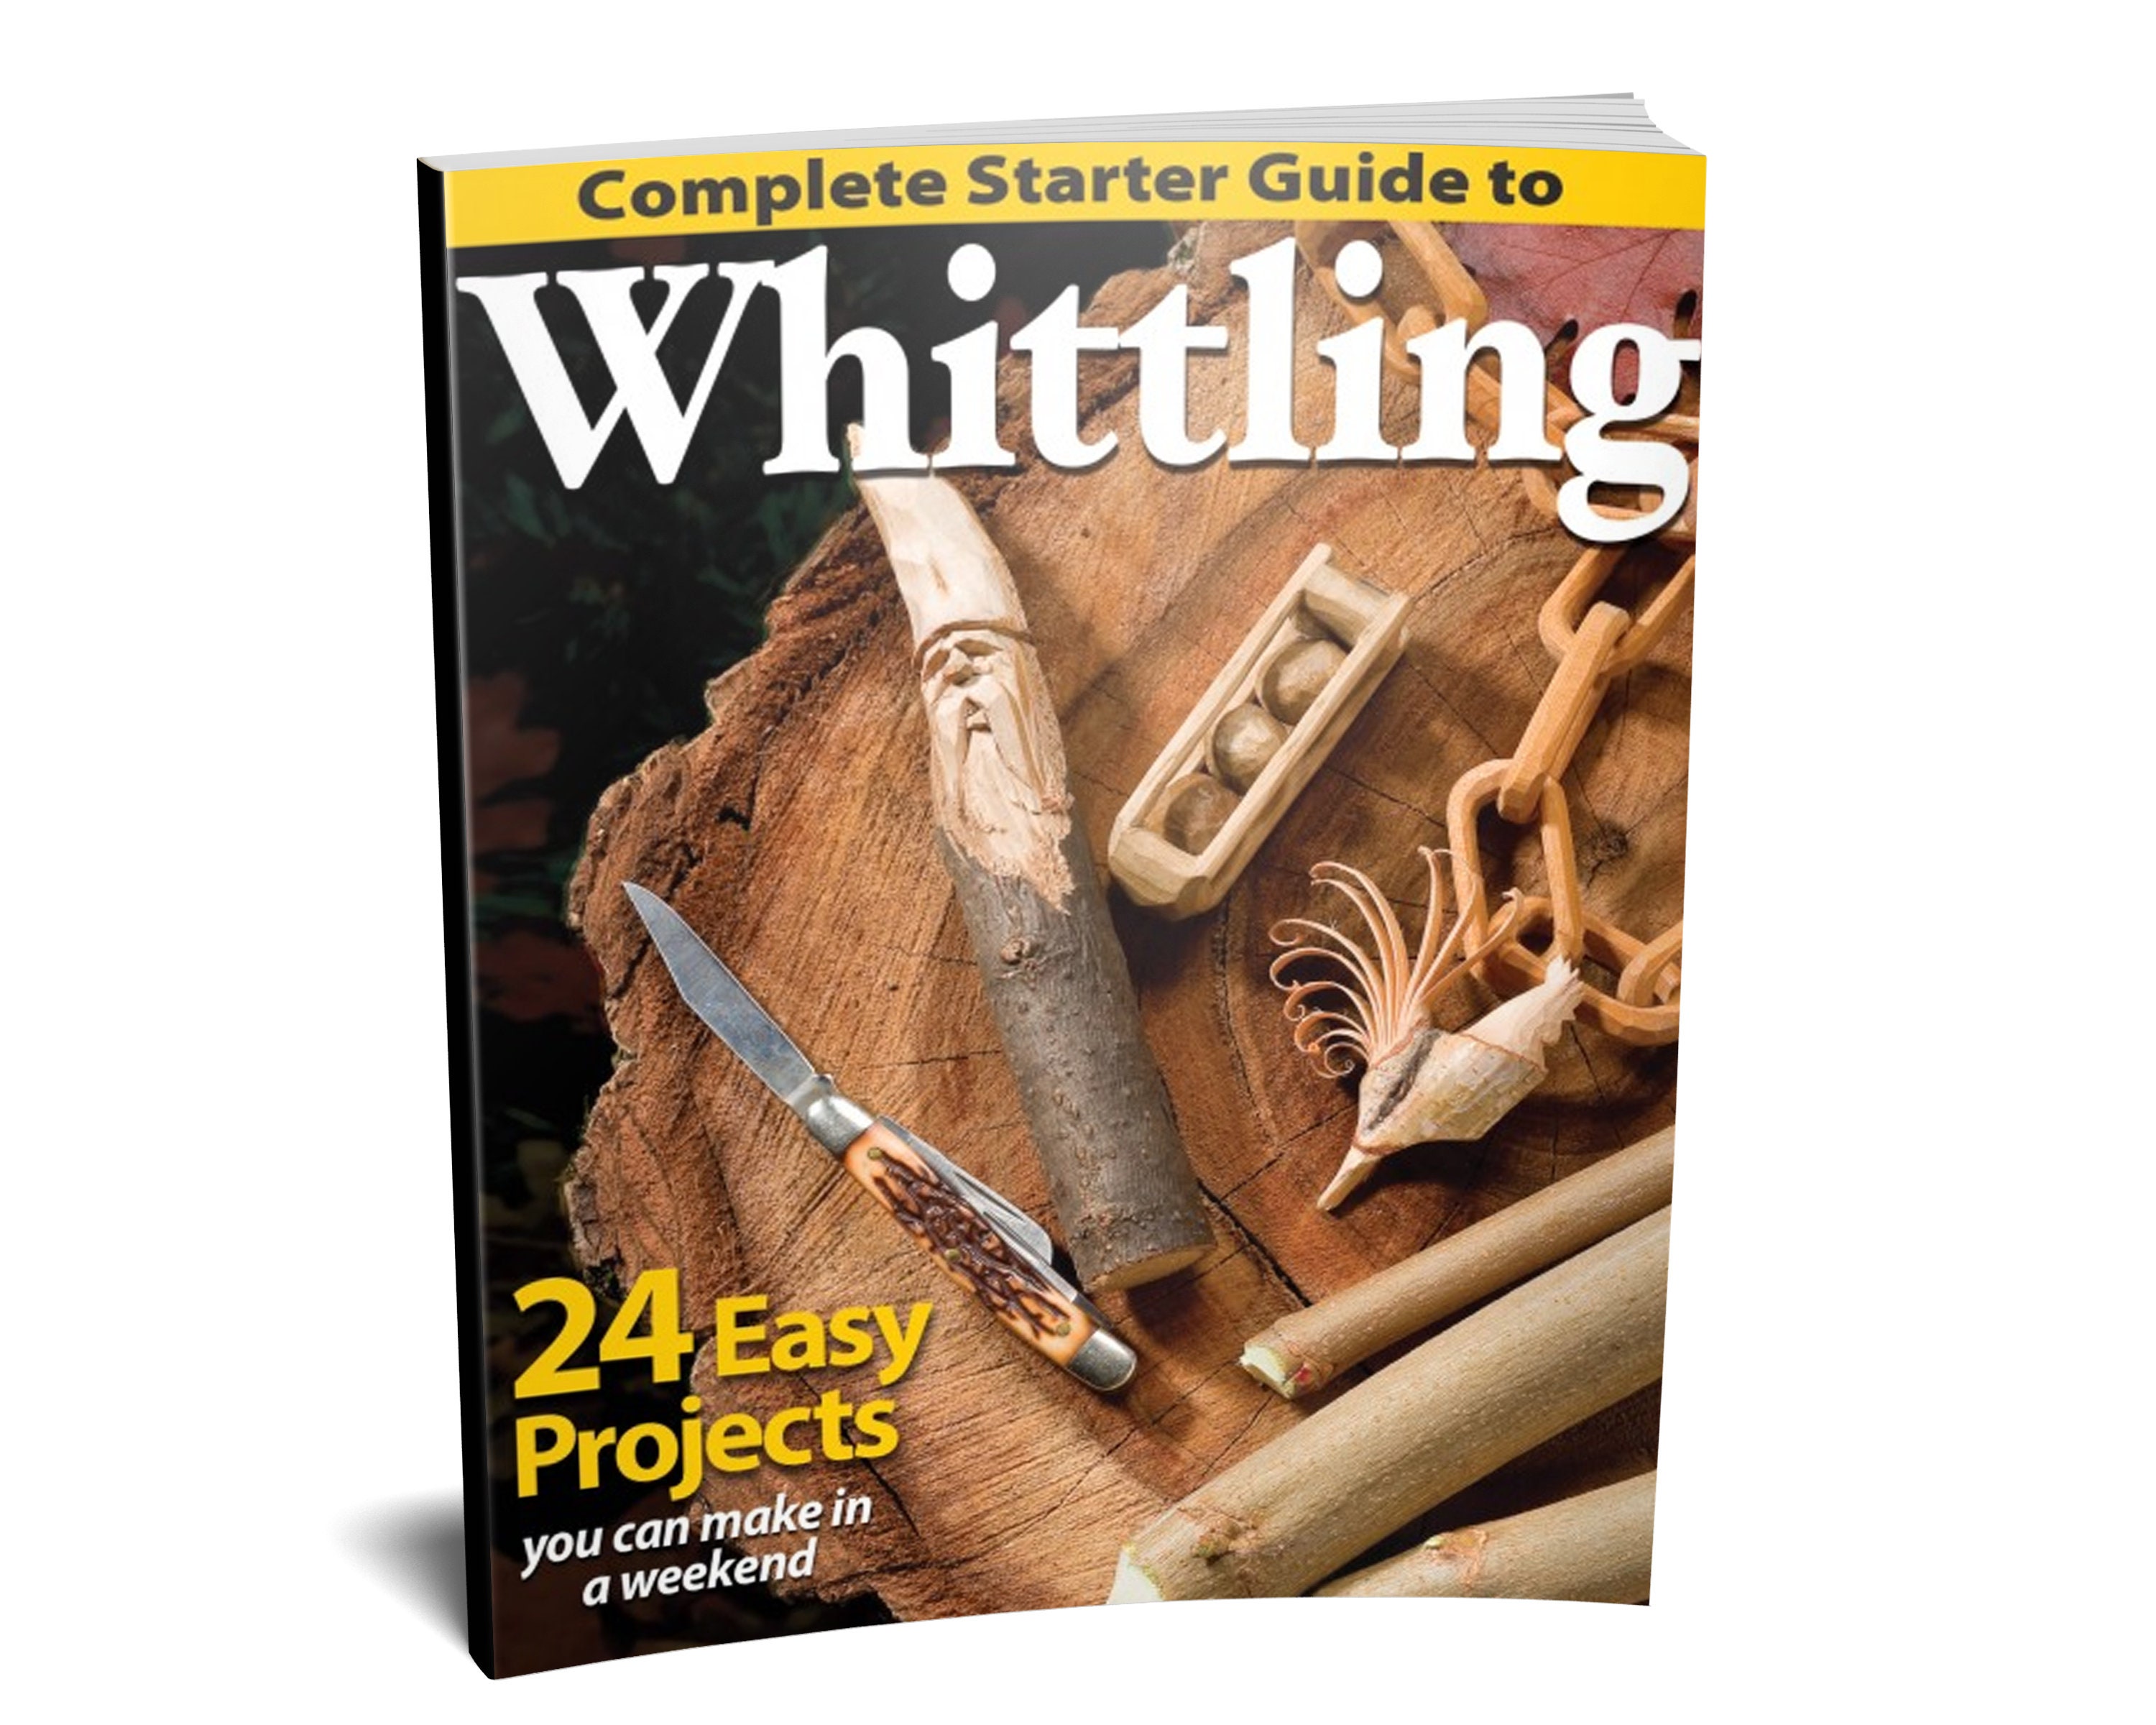 Whittling wonders: essential tools for whittling projects